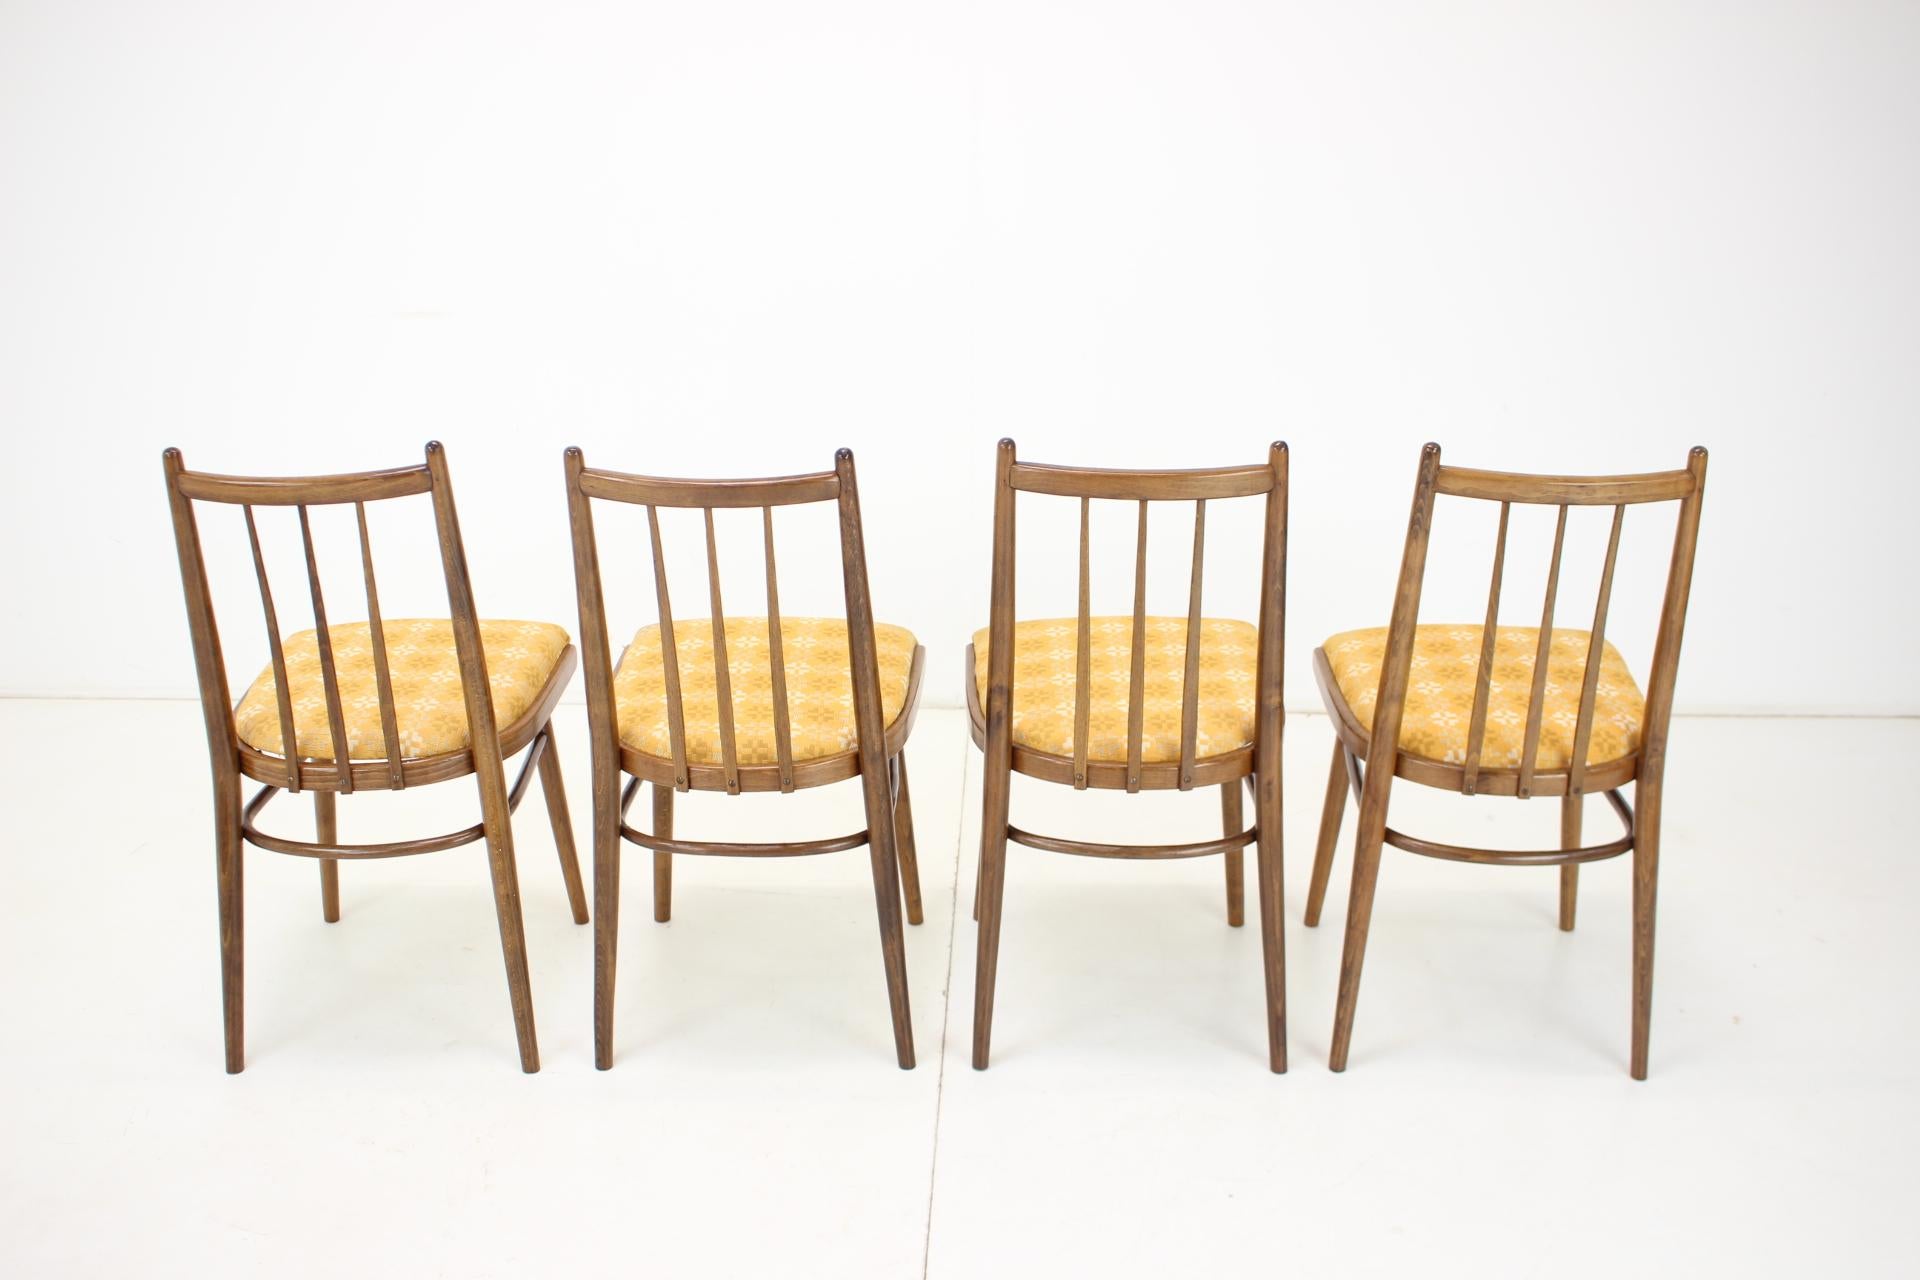 1970s Set of Four Dining Chairs by Jitona, Czechoslovakia For Sale 1